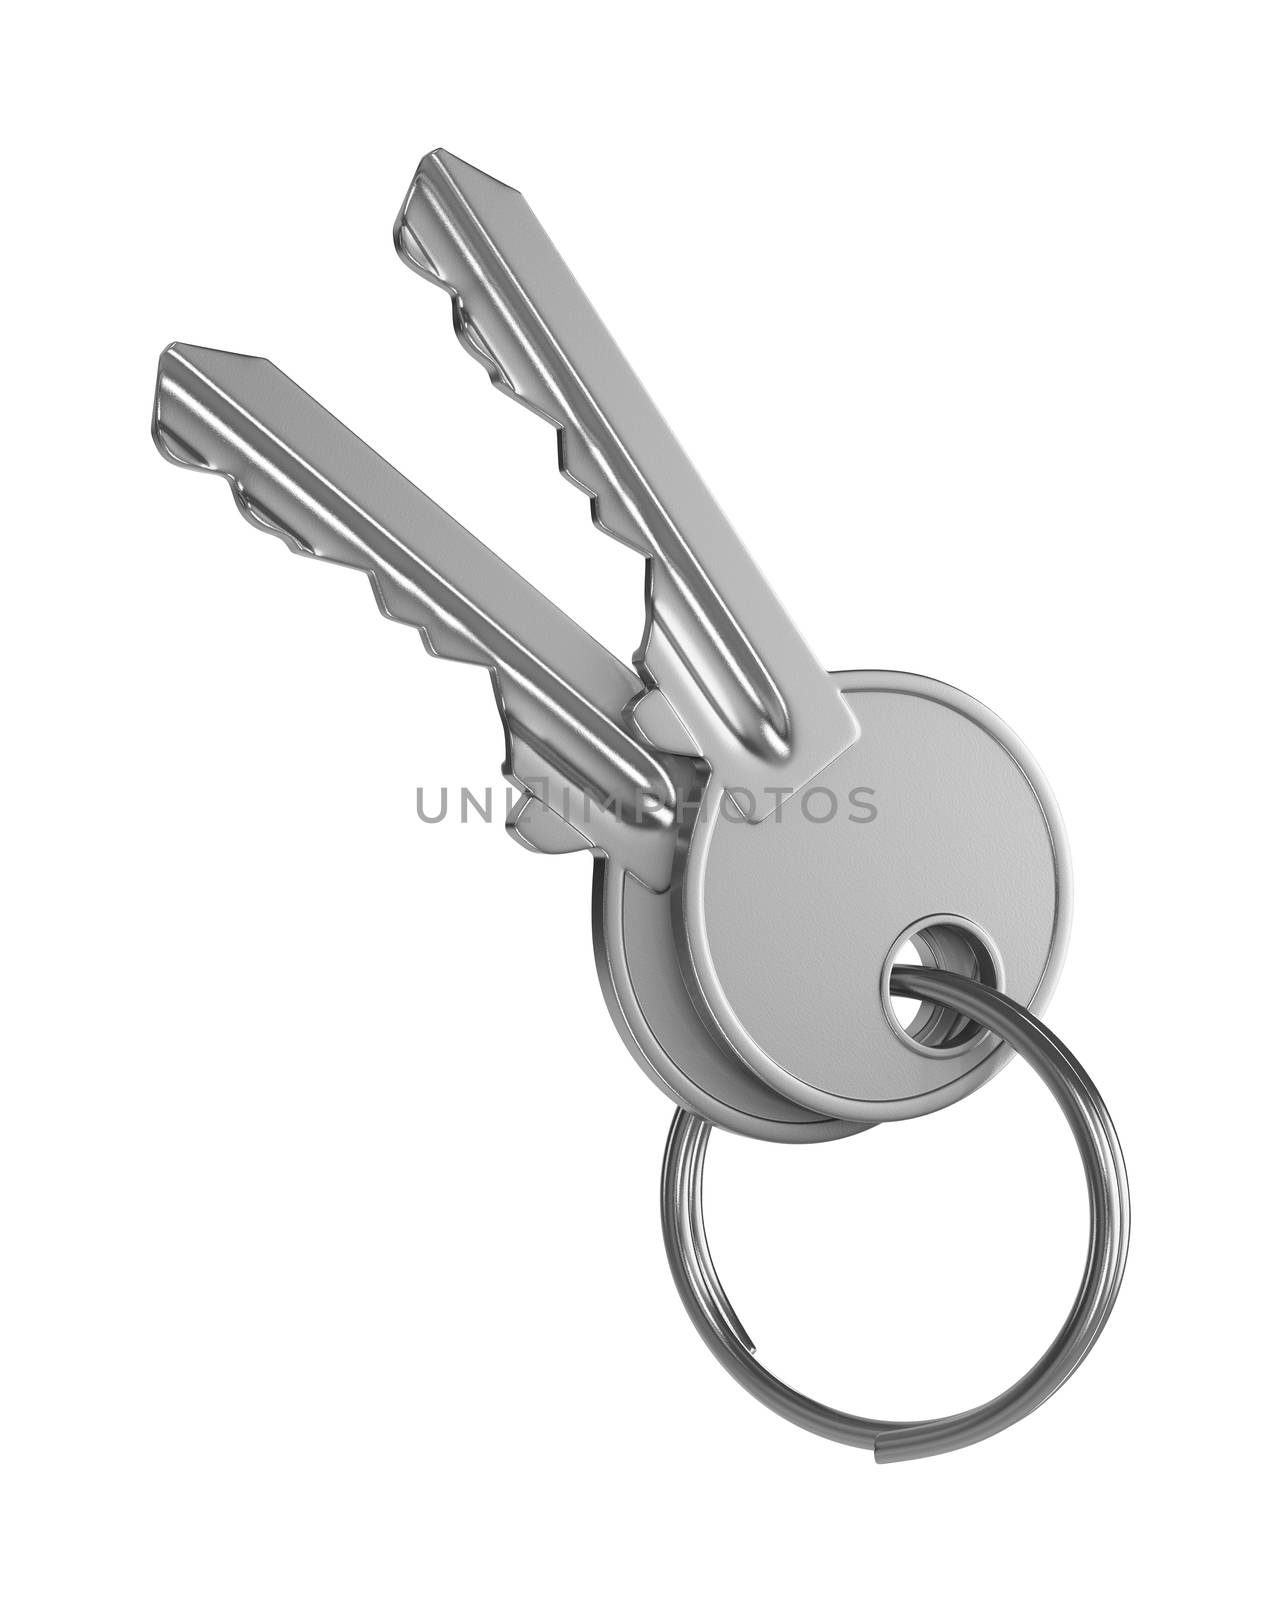 Couple of Metal Keys Isolated by make